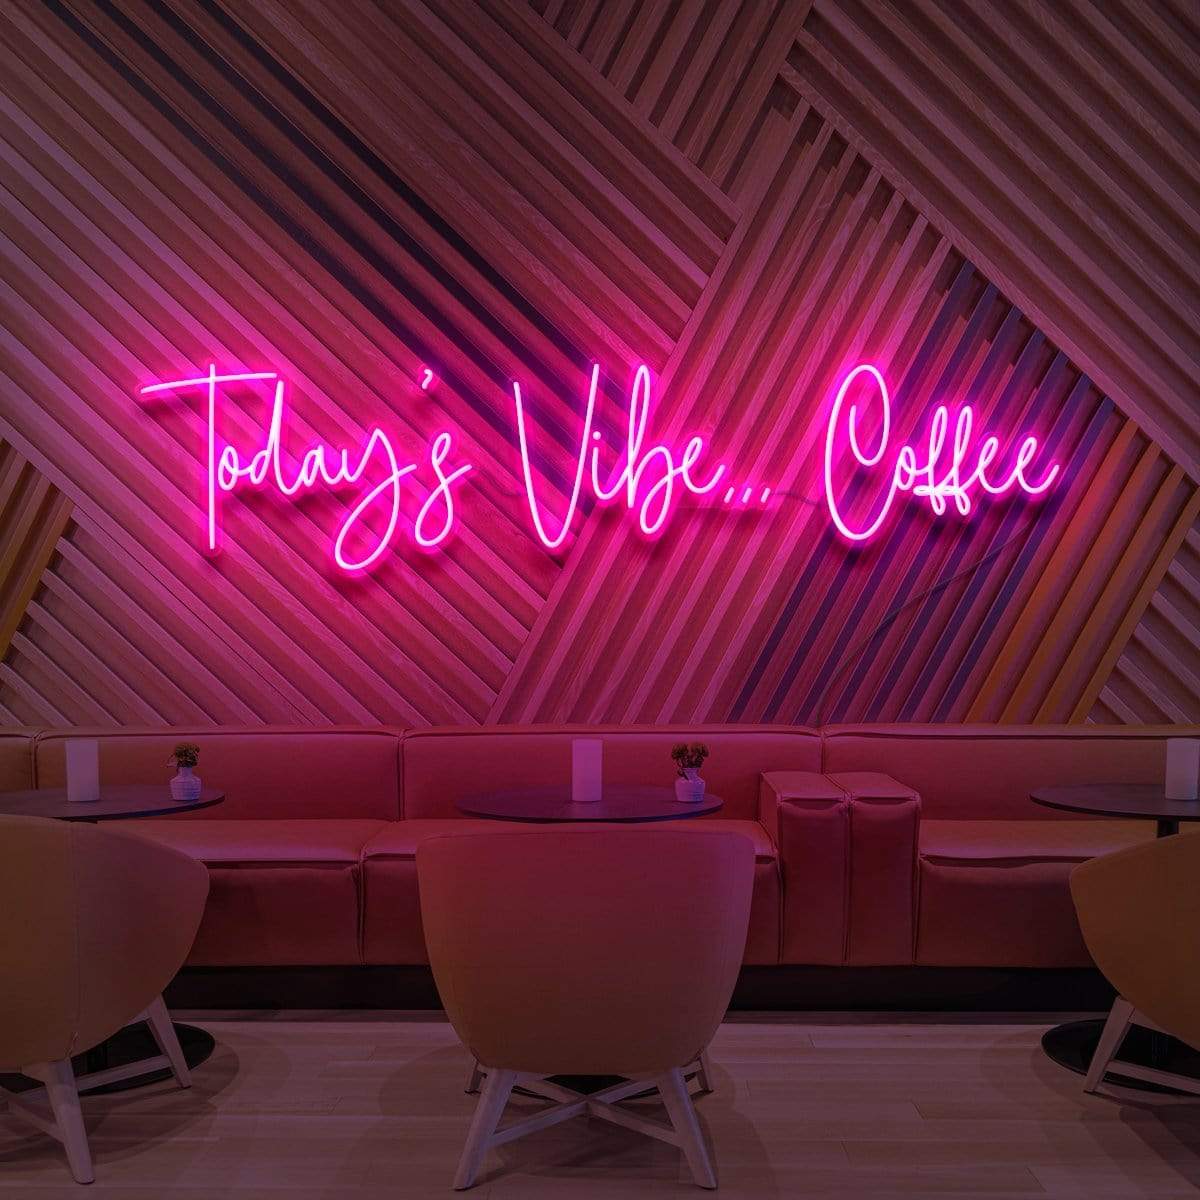 "Today's Vibe... Coffee" Neon Sign for Cafés 90cm (3ft) / Pink / LED Neon by Neon Icons